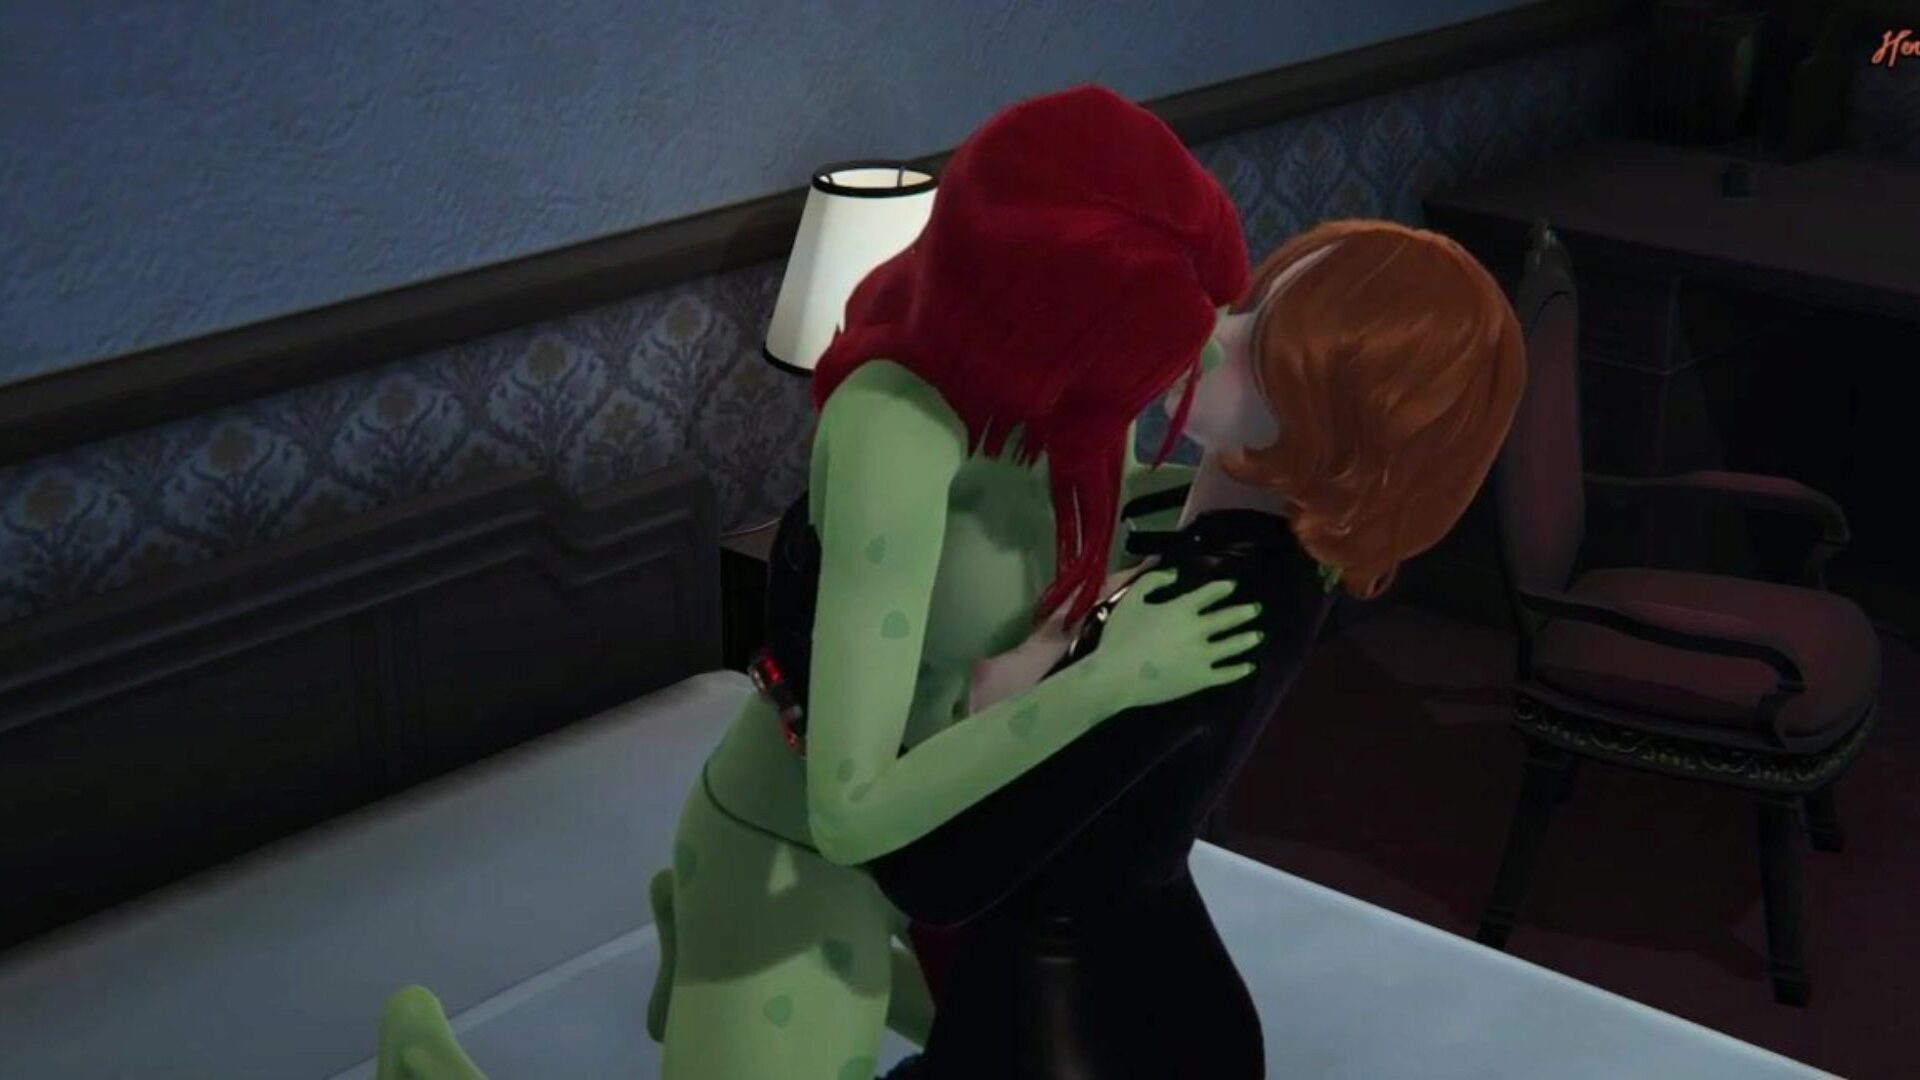 Poison Ivy bonks Black Widow with a orgy toy until this babe jizzes